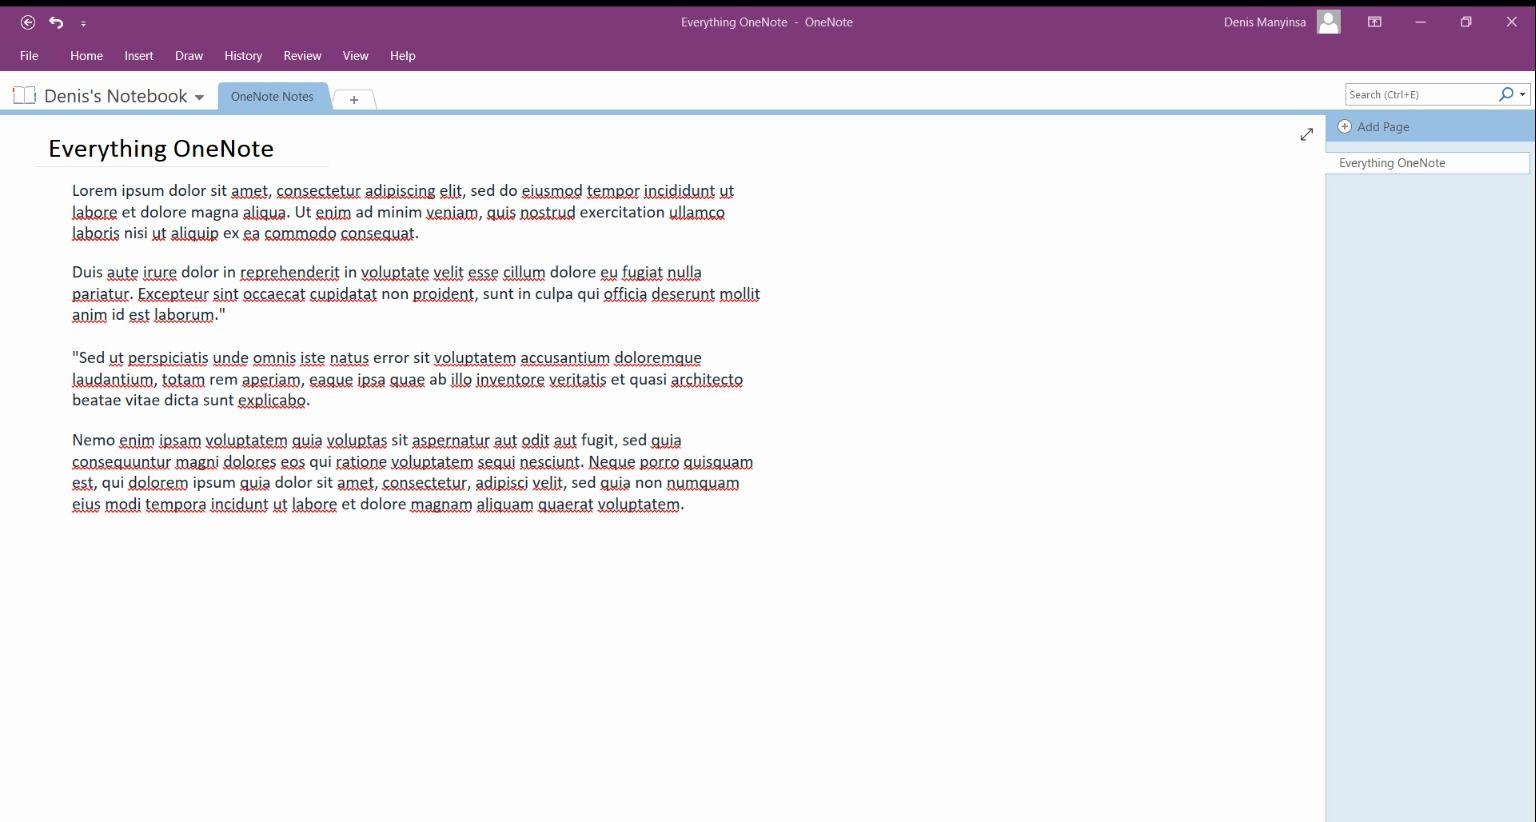 OneNote launched